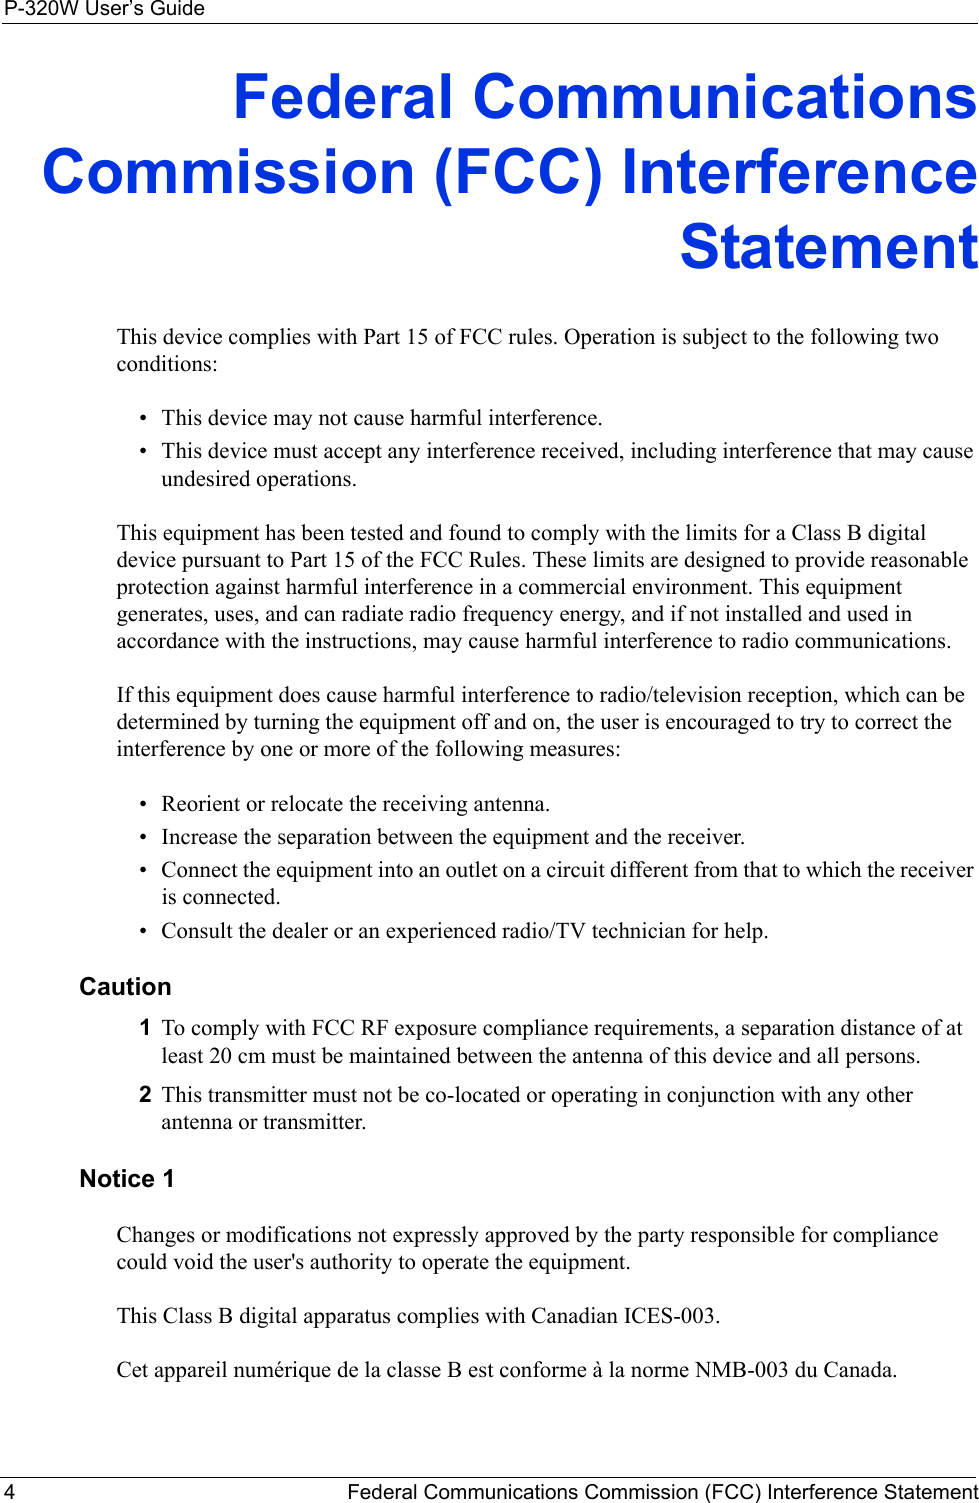 P-320W User’s Guide4   Federal Communications Commission (FCC) Interference StatementFederal Communications Commission (FCC) Interference StatementThis device complies with Part 15 of FCC rules. Operation is subject to the following two conditions:• This device may not cause harmful interference.• This device must accept any interference received, including interference that may cause undesired operations.This equipment has been tested and found to comply with the limits for a Class B digital device pursuant to Part 15 of the FCC Rules. These limits are designed to provide reasonable protection against harmful interference in a commercial environment. This equipment generates, uses, and can radiate radio frequency energy, and if not installed and used in accordance with the instructions, may cause harmful interference to radio communications.If this equipment does cause harmful interference to radio/television reception, which can be determined by turning the equipment off and on, the user is encouraged to try to correct the interference by one or more of the following measures:• Reorient or relocate the receiving antenna.• Increase the separation between the equipment and the receiver.• Connect the equipment into an outlet on a circuit different from that to which the receiver is connected.• Consult the dealer or an experienced radio/TV technician for help.Caution1To comply with FCC RF exposure compliance requirements, a separation distance of at least 20 cm must be maintained between the antenna of this device and all persons.2This transmitter must not be co-located or operating in conjunction with any other antenna or transmitter.Notice 1Changes or modifications not expressly approved by the party responsible for compliance could void the user&apos;s authority to operate the equipment.This Class B digital apparatus complies with Canadian ICES-003.Cet appareil numérique de la classe B est conforme à la norme NMB-003 du Canada.